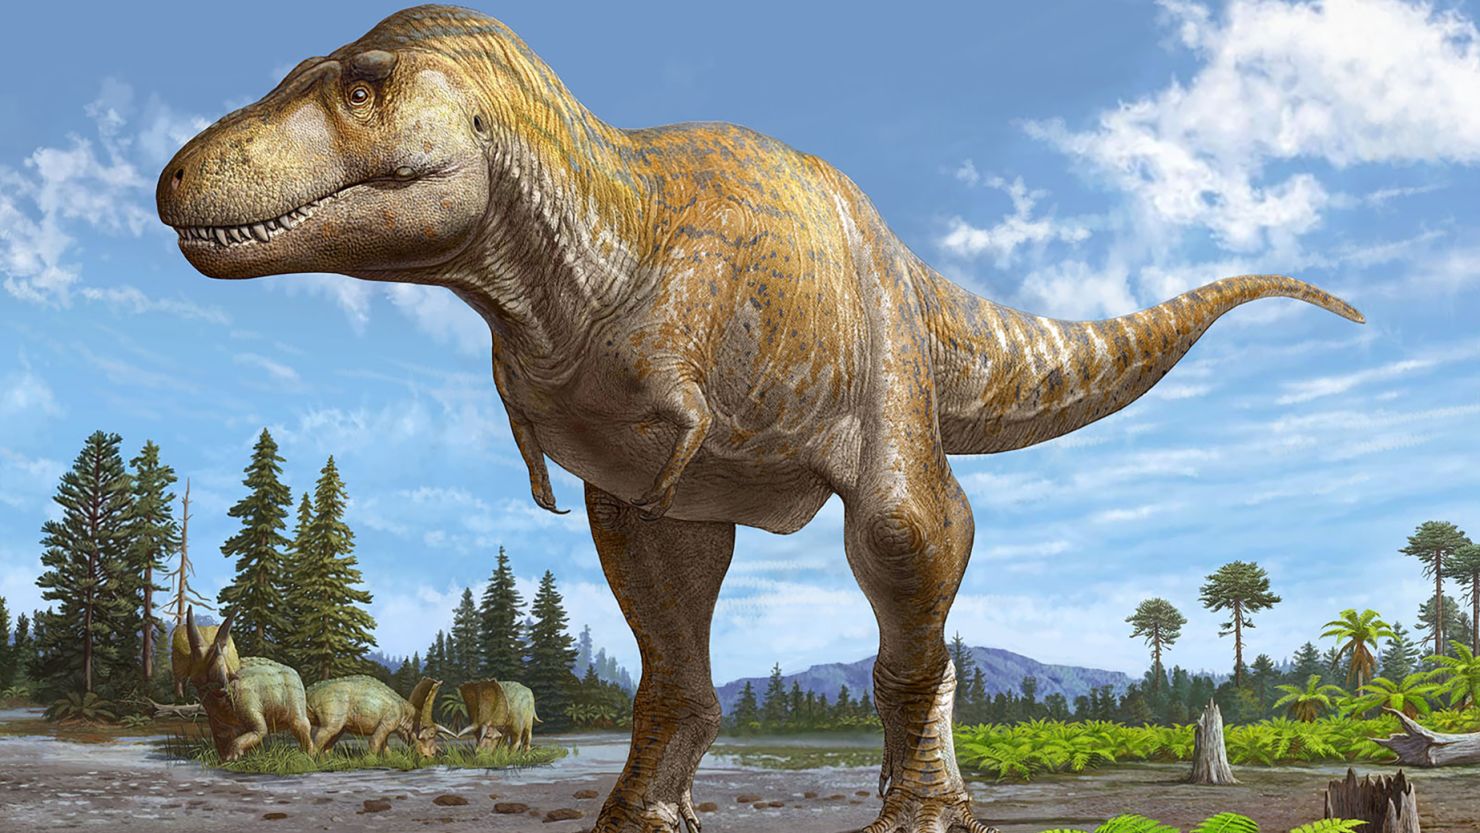 Confirmed: Fossilized T. Rex was expectant mother, Science